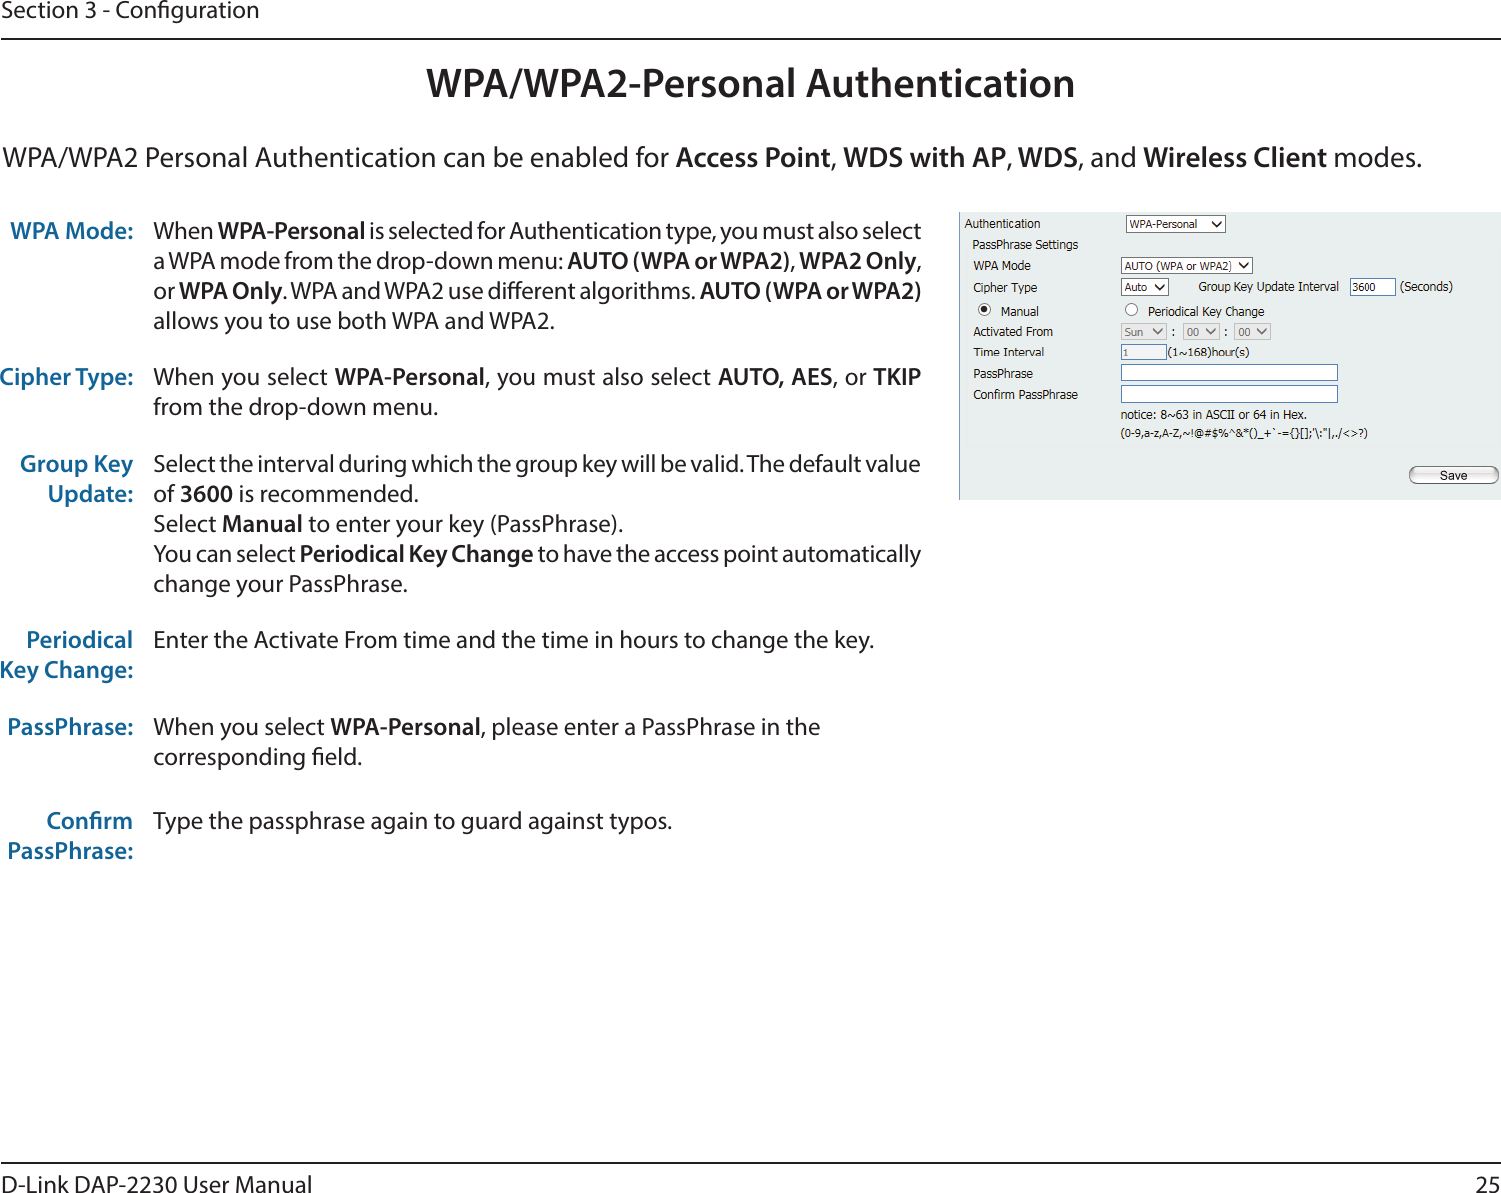 25D-Link DAP-2230 User ManualSection 3 - CongurationWPA/WPA2-Personal AuthenticationWPA Mode:  When WPA-Personal is selected for Authentication type, you must also select a WPA mode from the drop-down menu: AUTO (WPA or WPA2), WPA2 Only, or WPA Only. WPA and WPA2 use dierent algorithms. AUTO (WPA or WPA2) allows you to use both WPA and WPA2.Cipher Type: When you select WPA-Personal, you must also select AUTO, AES, or TKIP from the drop-down menu.Group Key Update:Select the interval during which the group key will be valid. The default value of 3600 is recommended.Select Manual to enter your key (PassPhrase). You can select Periodical Key Change to have the access point automatically change your PassPhrase. Periodical Key Change:Enter the Activate From time and the time in hours to change the key.PassPhrase: When you select WPA-Personal, please enter a PassPhrase in the corresponding eld.ConrmPassPhrase:Type the passphrase again to guard against typos.WPA/WPA2 Personal Authentication can be enabled for Access Point, WDS with AP, WDS, and Wireless Client modes.